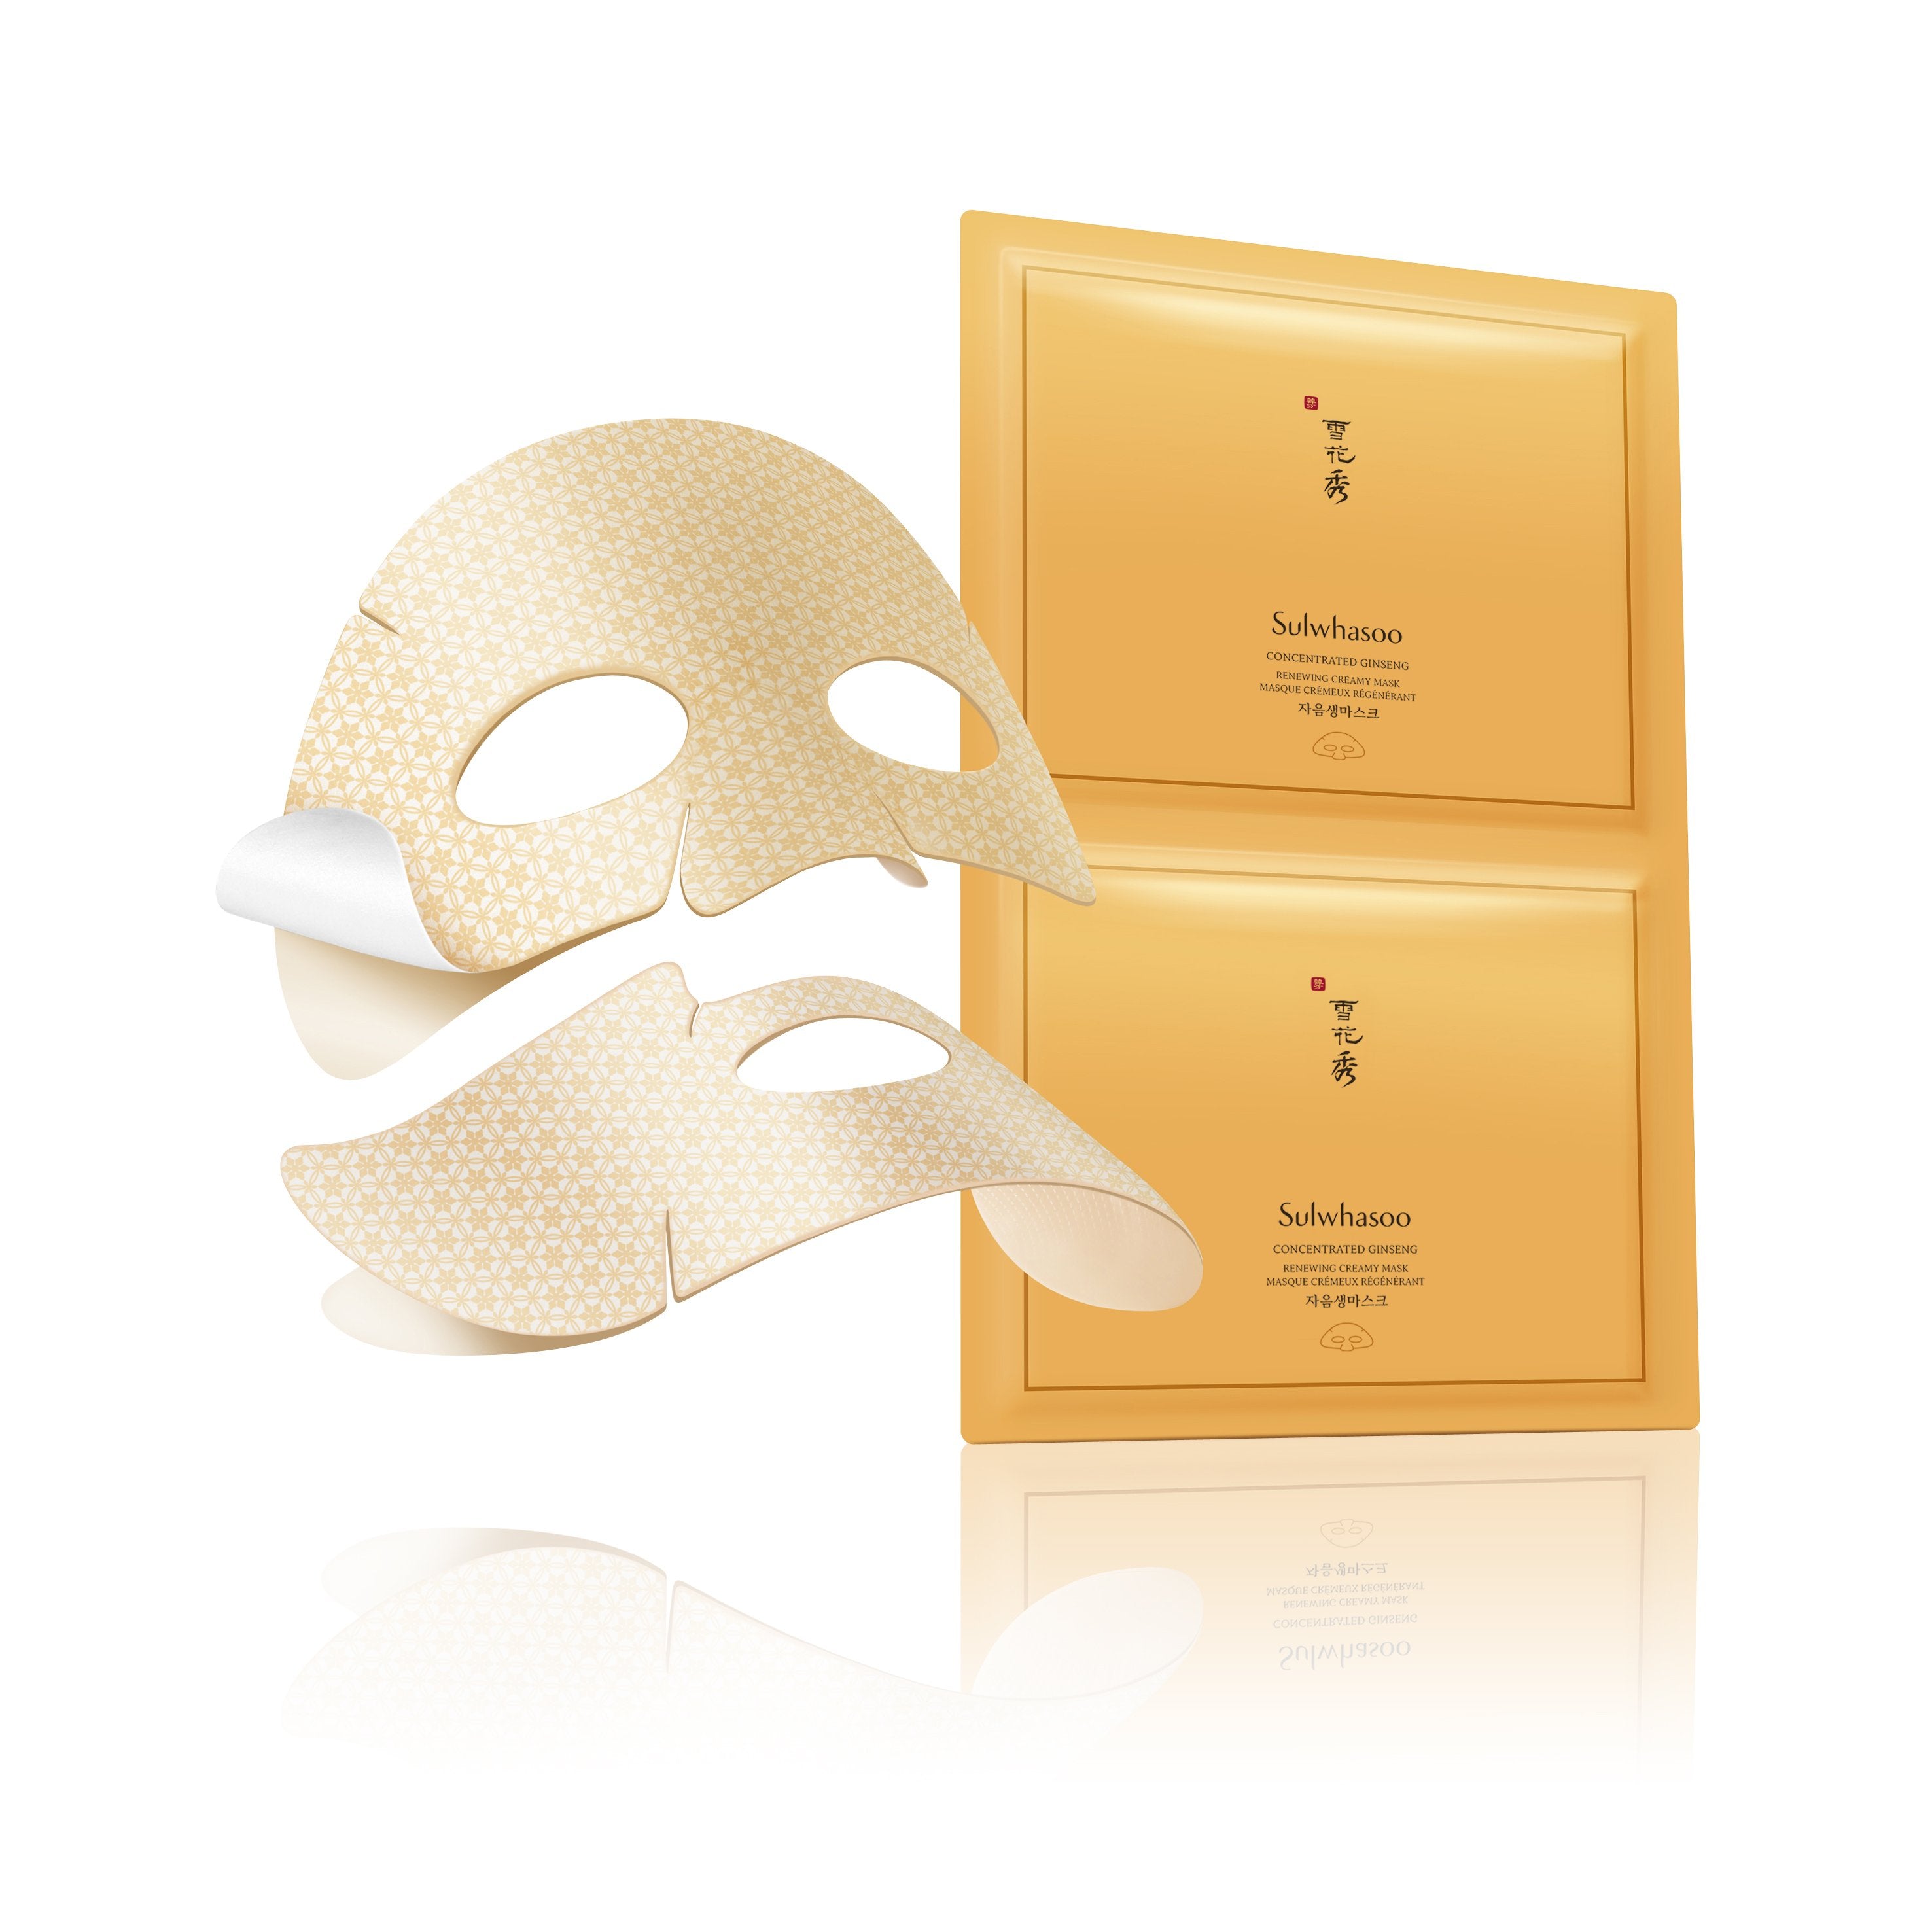 Sulwhasoo Concentrated Ginseng Renewing Creamy Mask 18g X 5ea